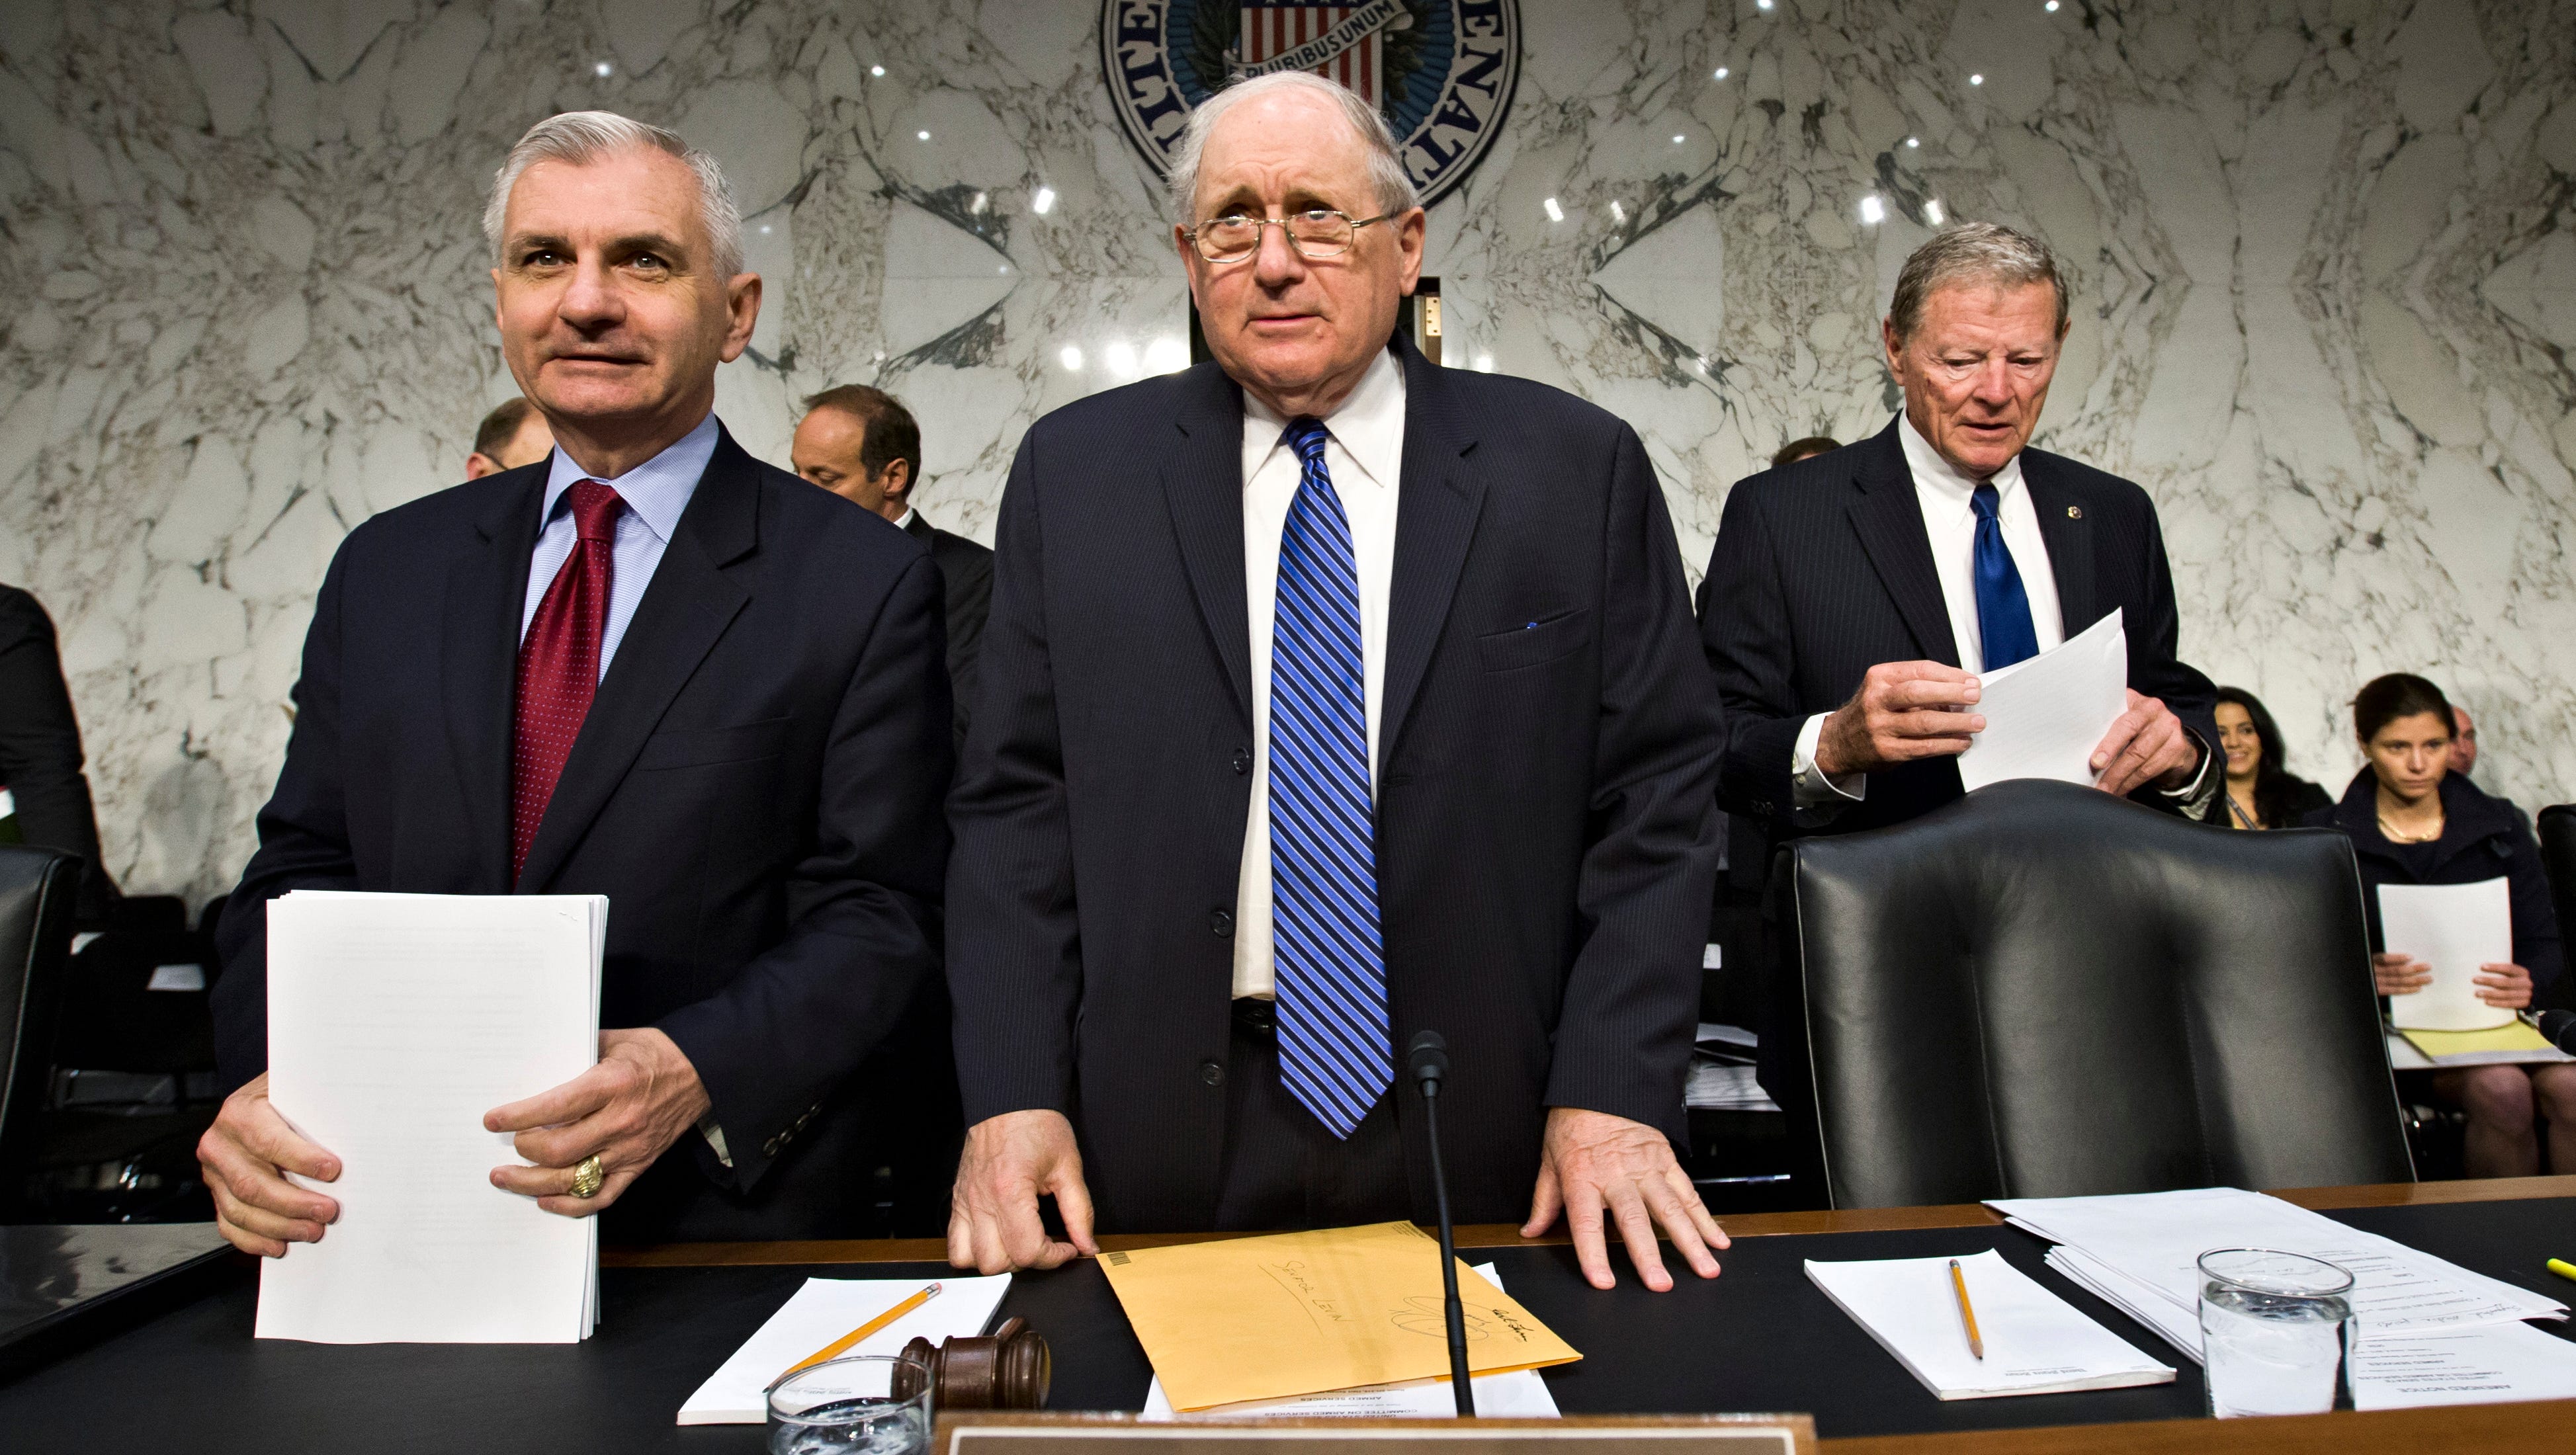 Senate Armed Services Committee Chairman Sen. Carl Levin flanked by Sen. Jack Reed, D-R.I., left, and the committee's ranking Republican, Sen. James Inhofe, R-Okla., arrive on Capitol Hill Tuesday, June 4, 2013, for the start of a hearing as Congress investigates the growing epidemic of sexual assaults within the military.